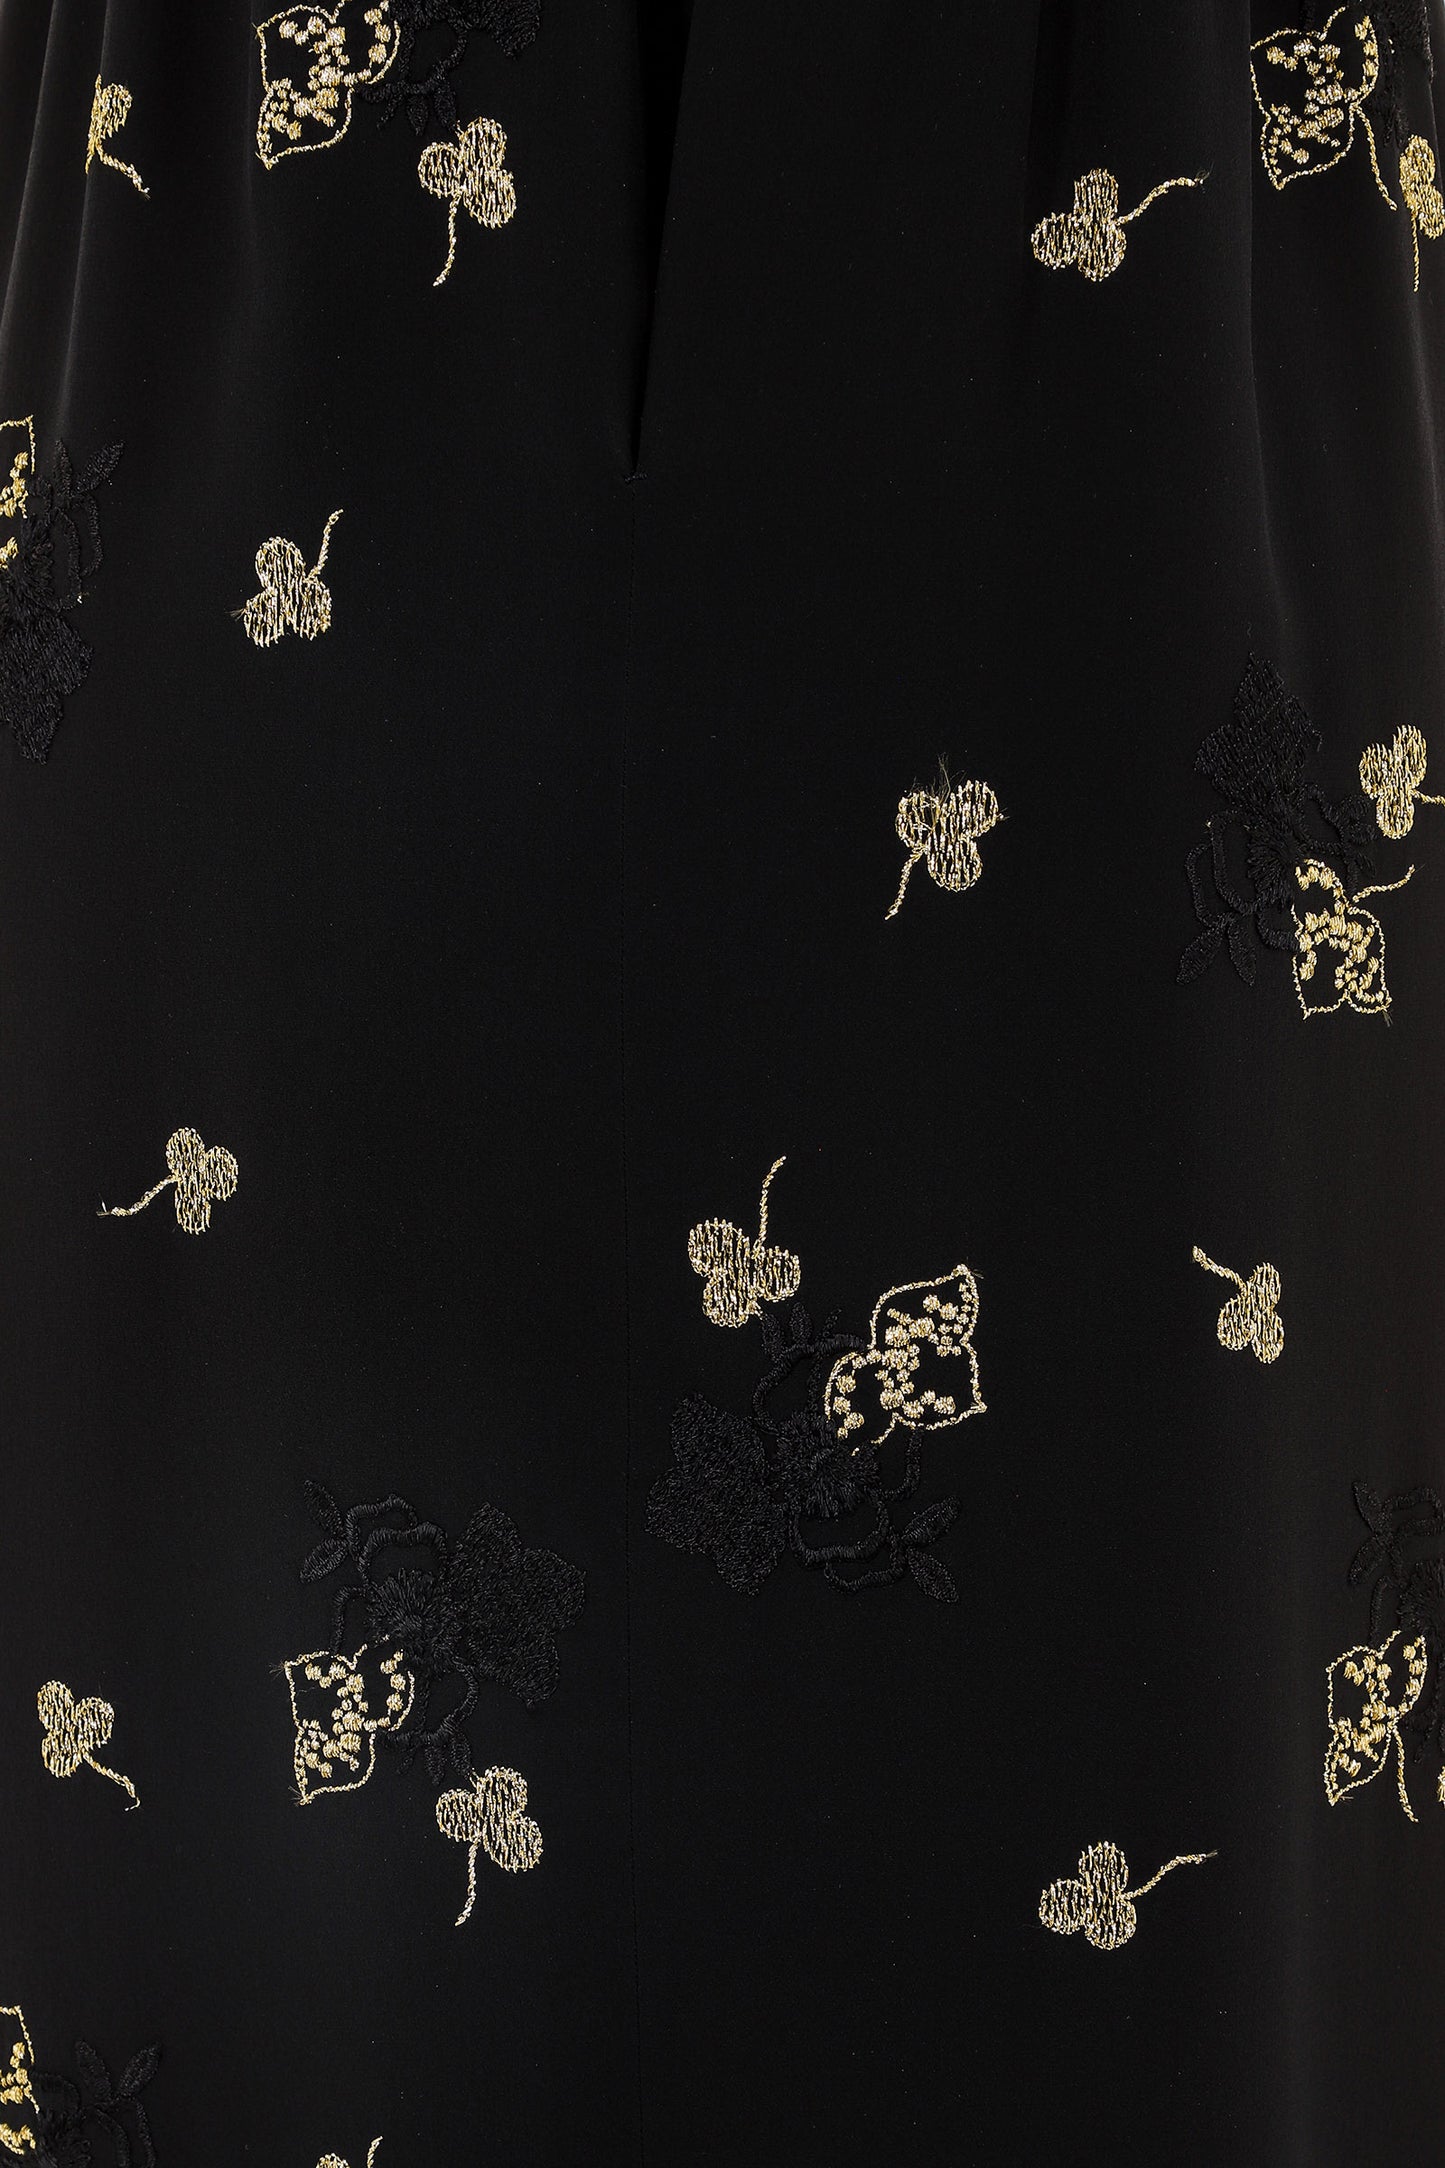 Chloé by Karl Lagerfeld Black Gown with Gold Flower Embroidery